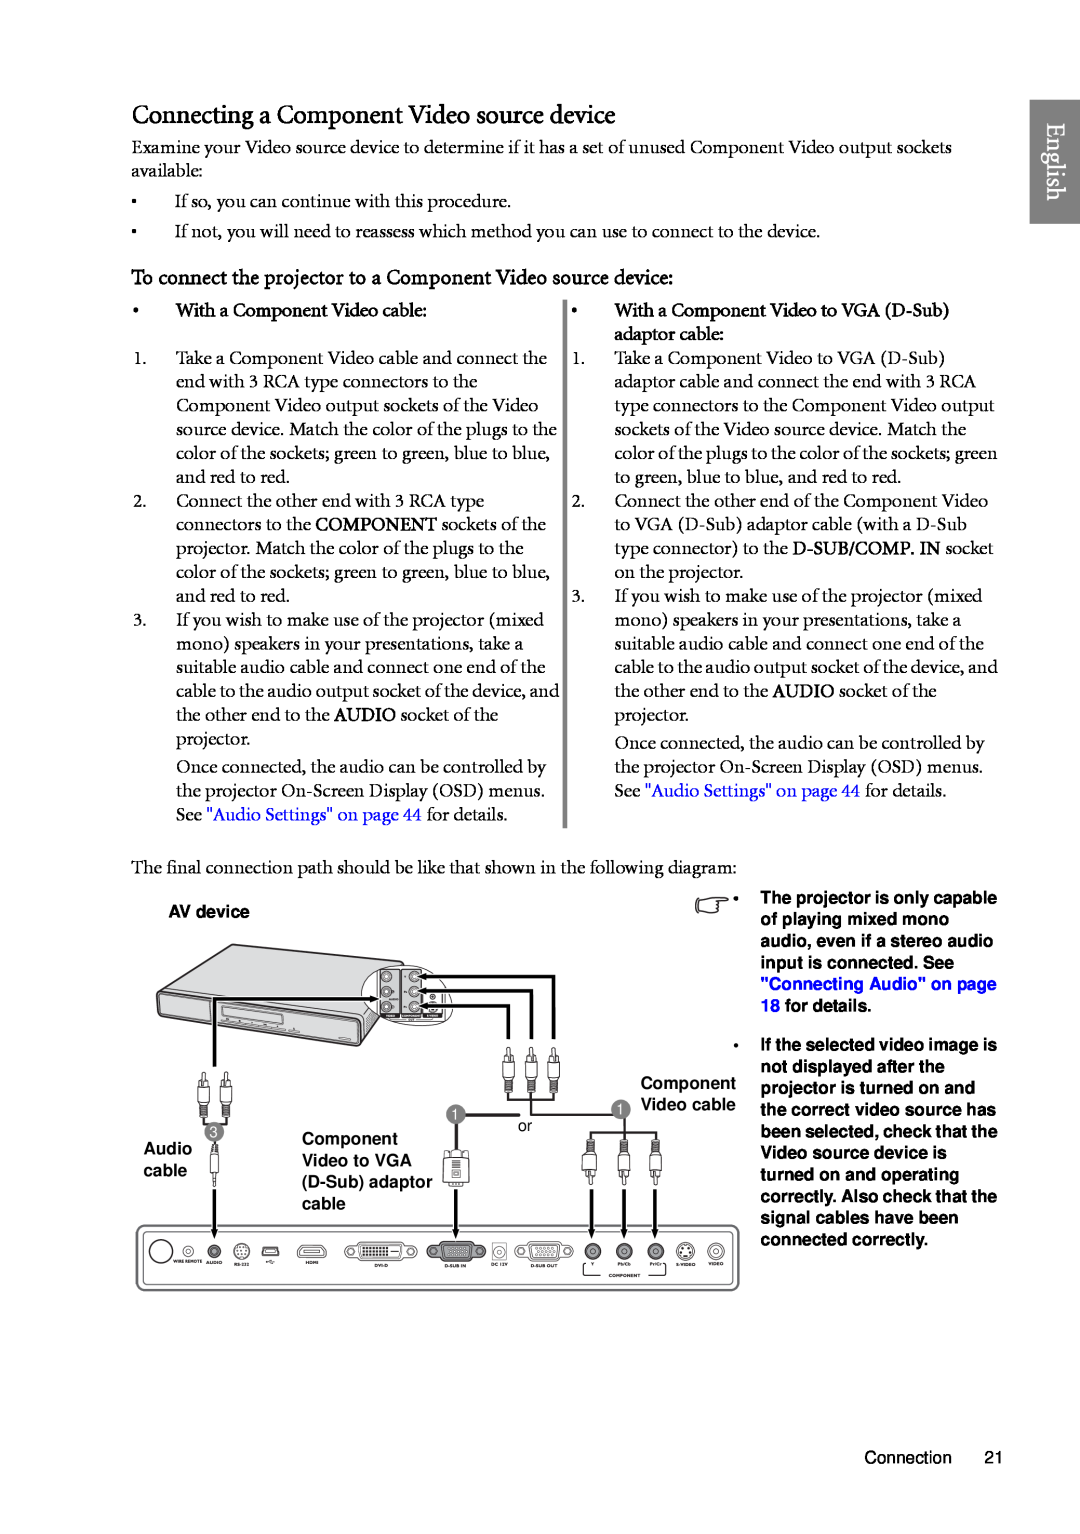 BenQ SP920 user manual Connecting a Component Video source device, English, With a Component Video cable 